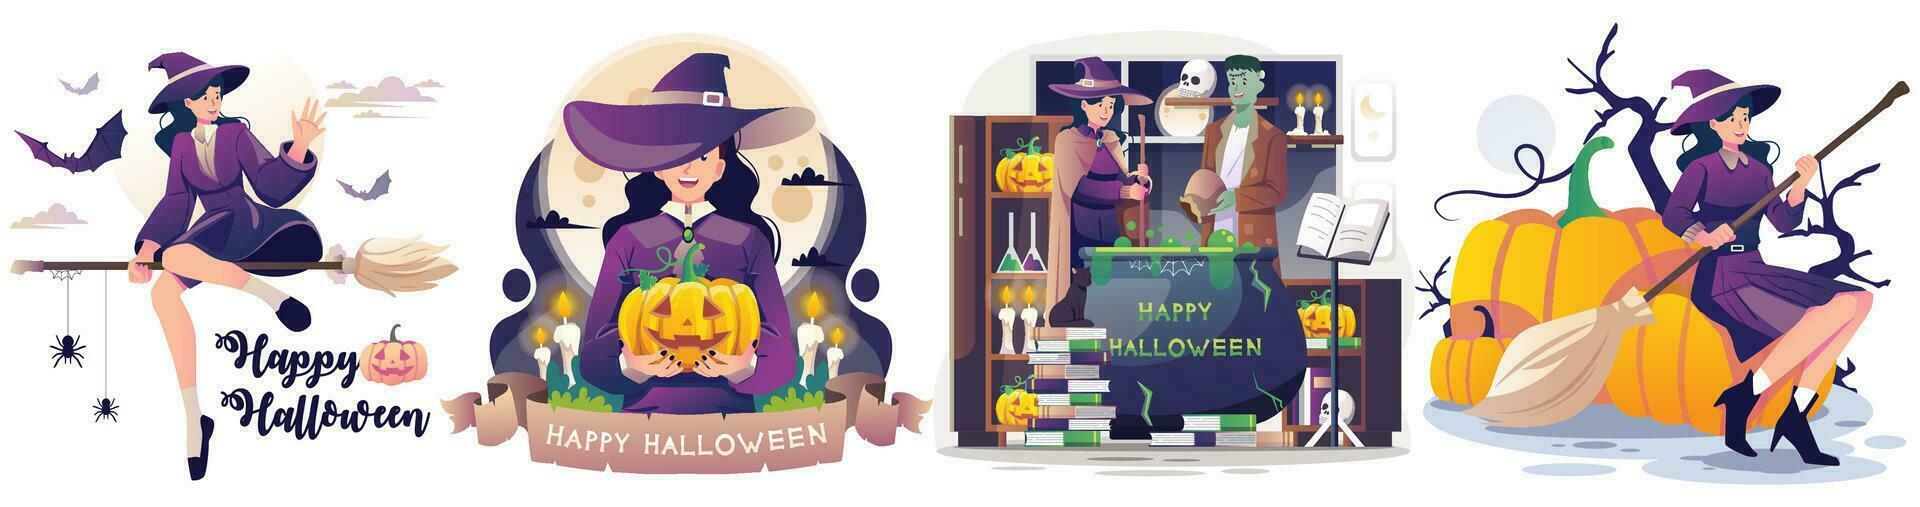 Set of Witch woman in Halloween dress concept illustration vector